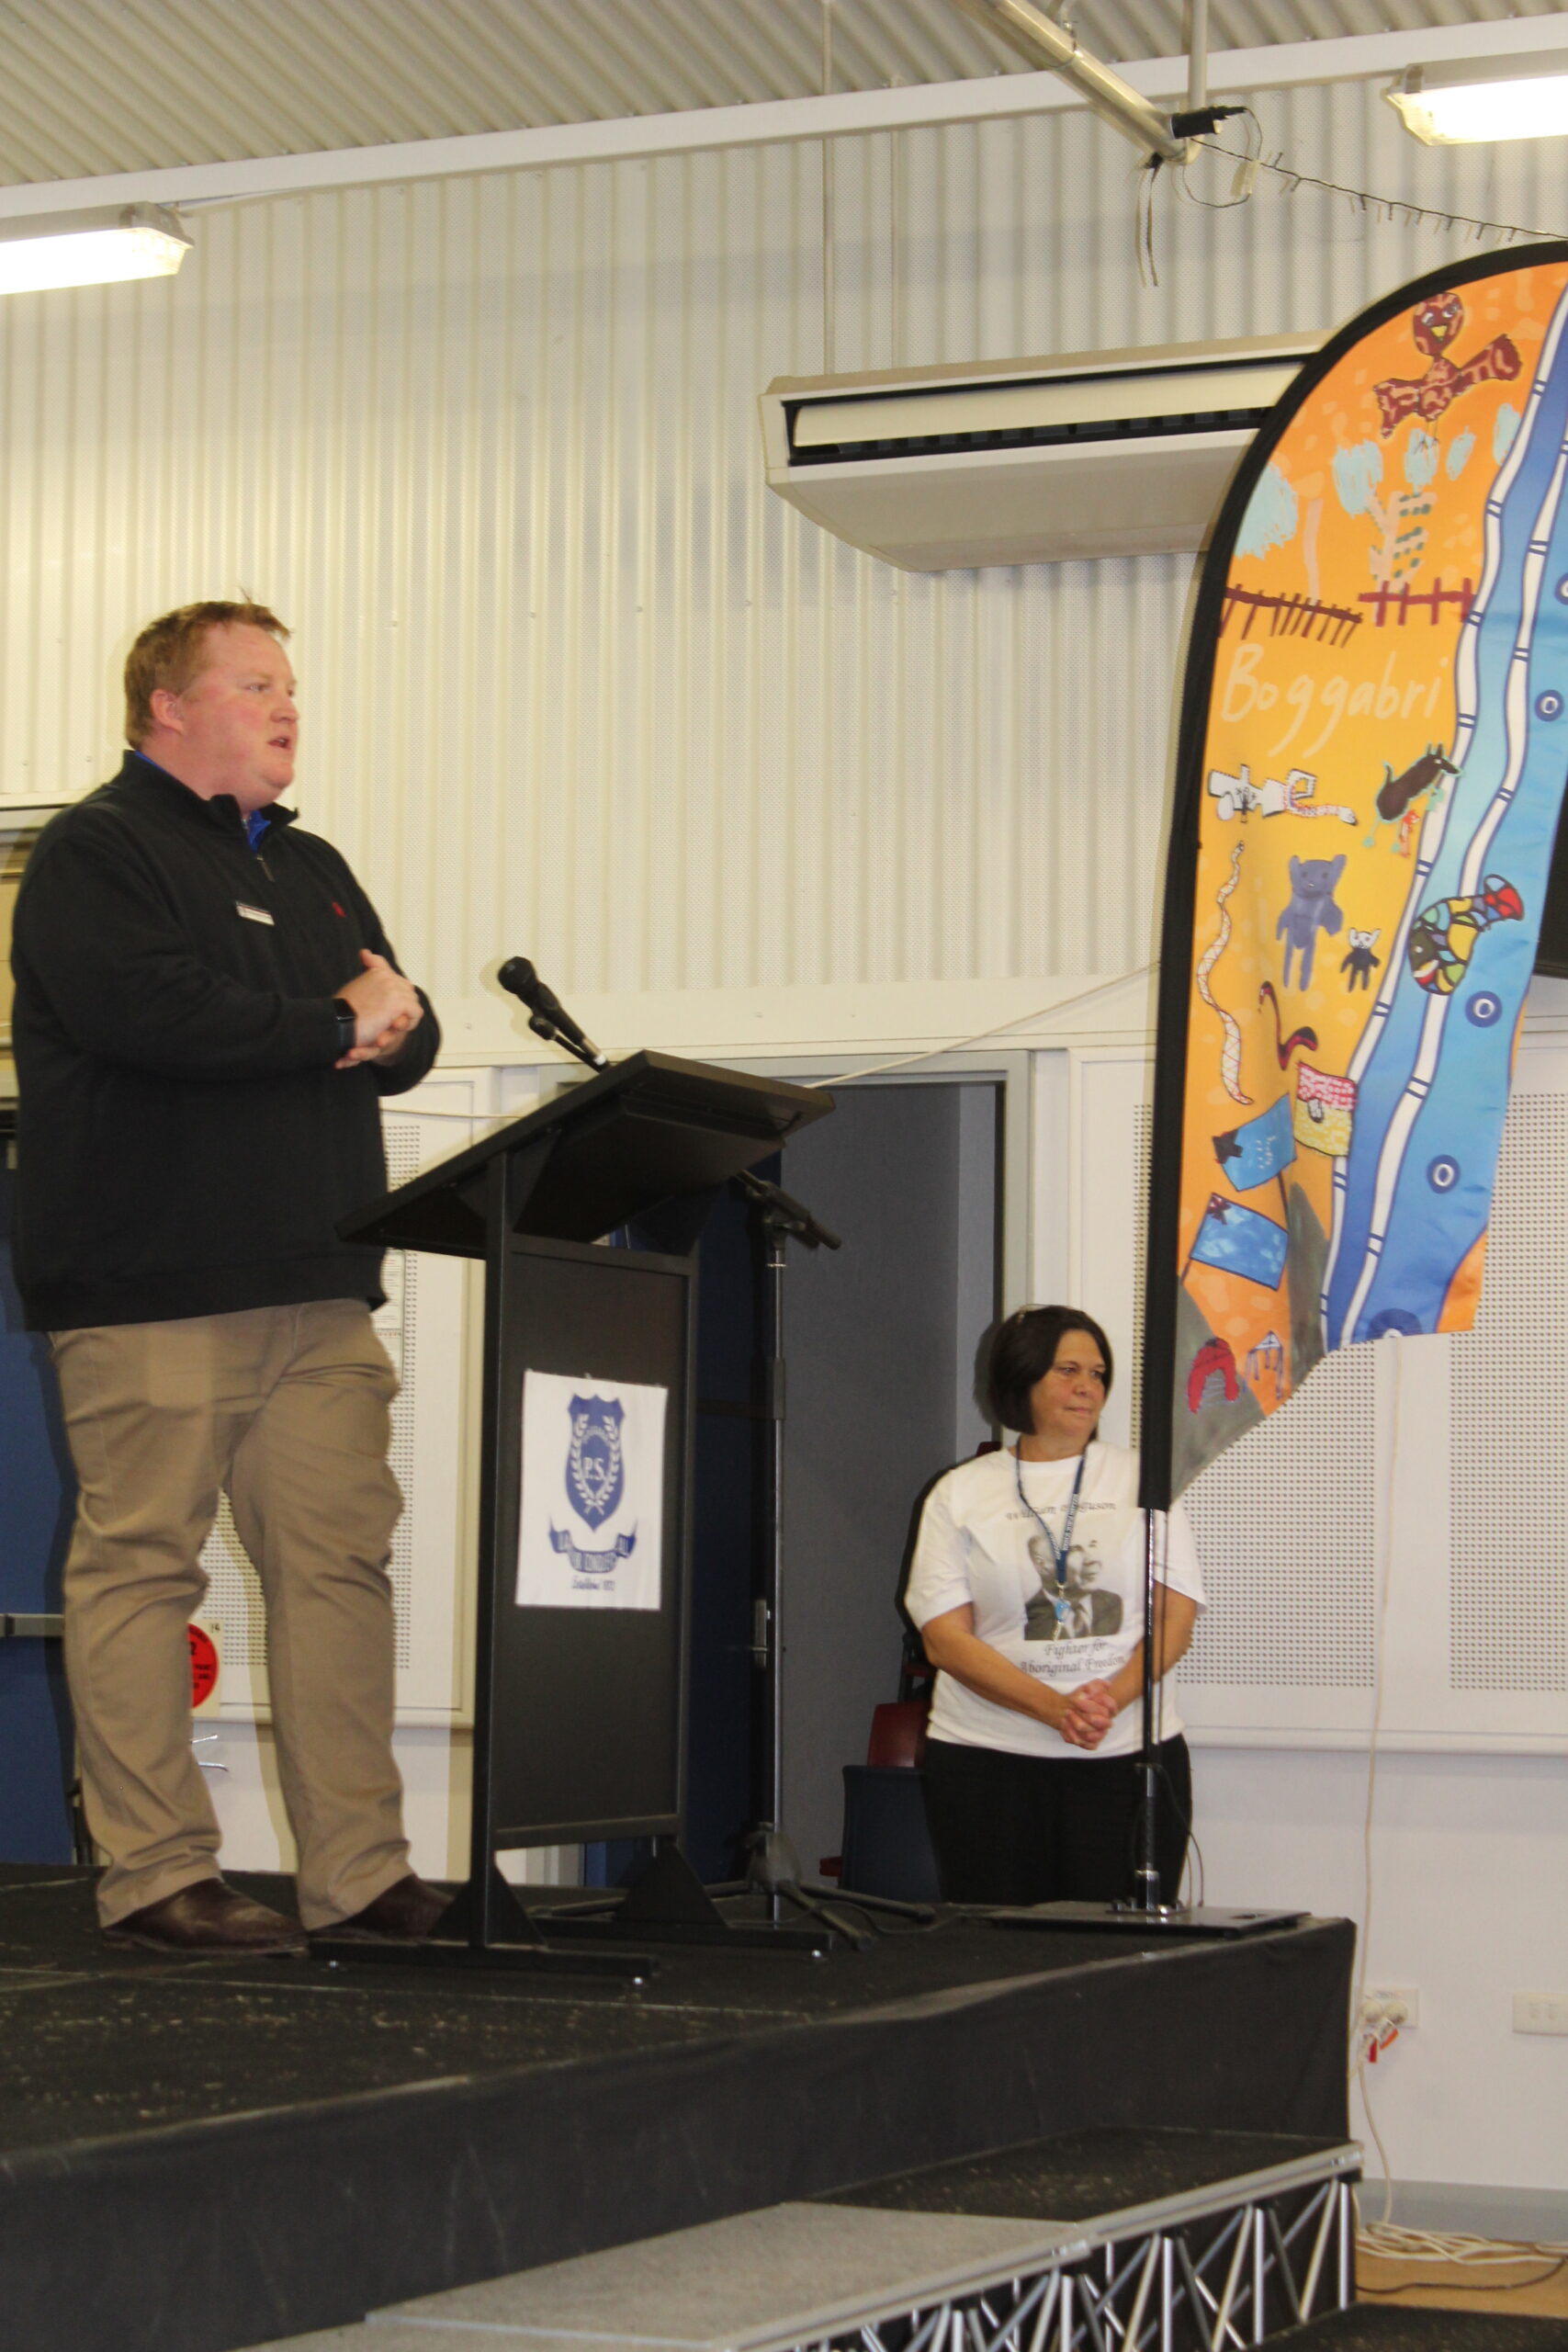 Benjamin Carter, principal of Boggabri, welcoming the participating schools supported by AEO Blanche Biles.